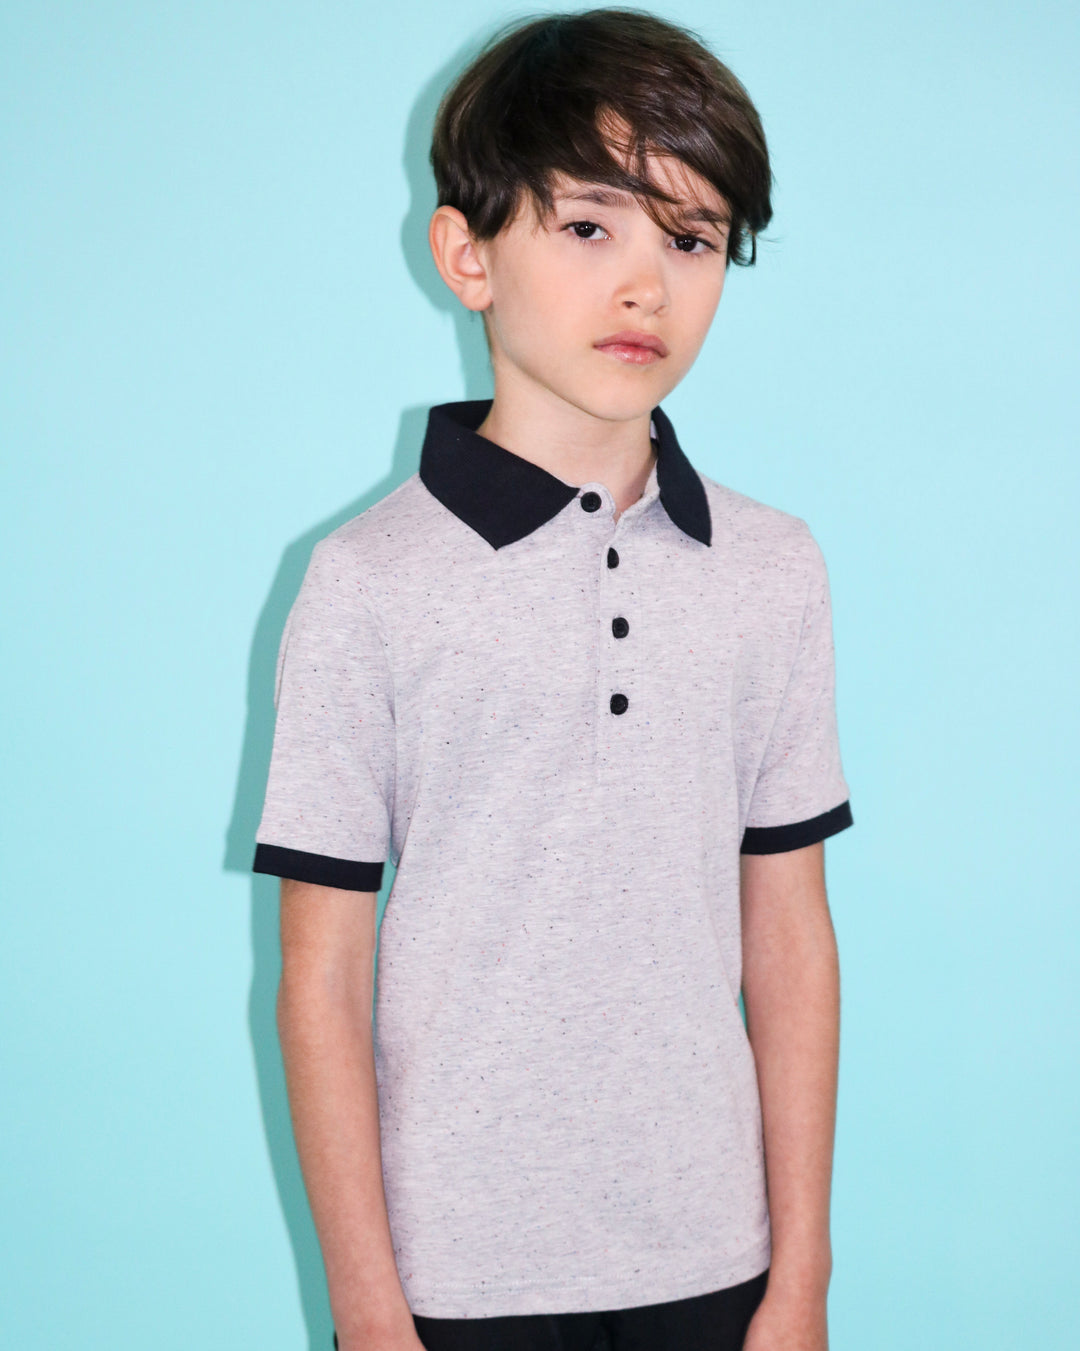 Jersey Grey Mix Colored Speckled Polo - Short Sleeve